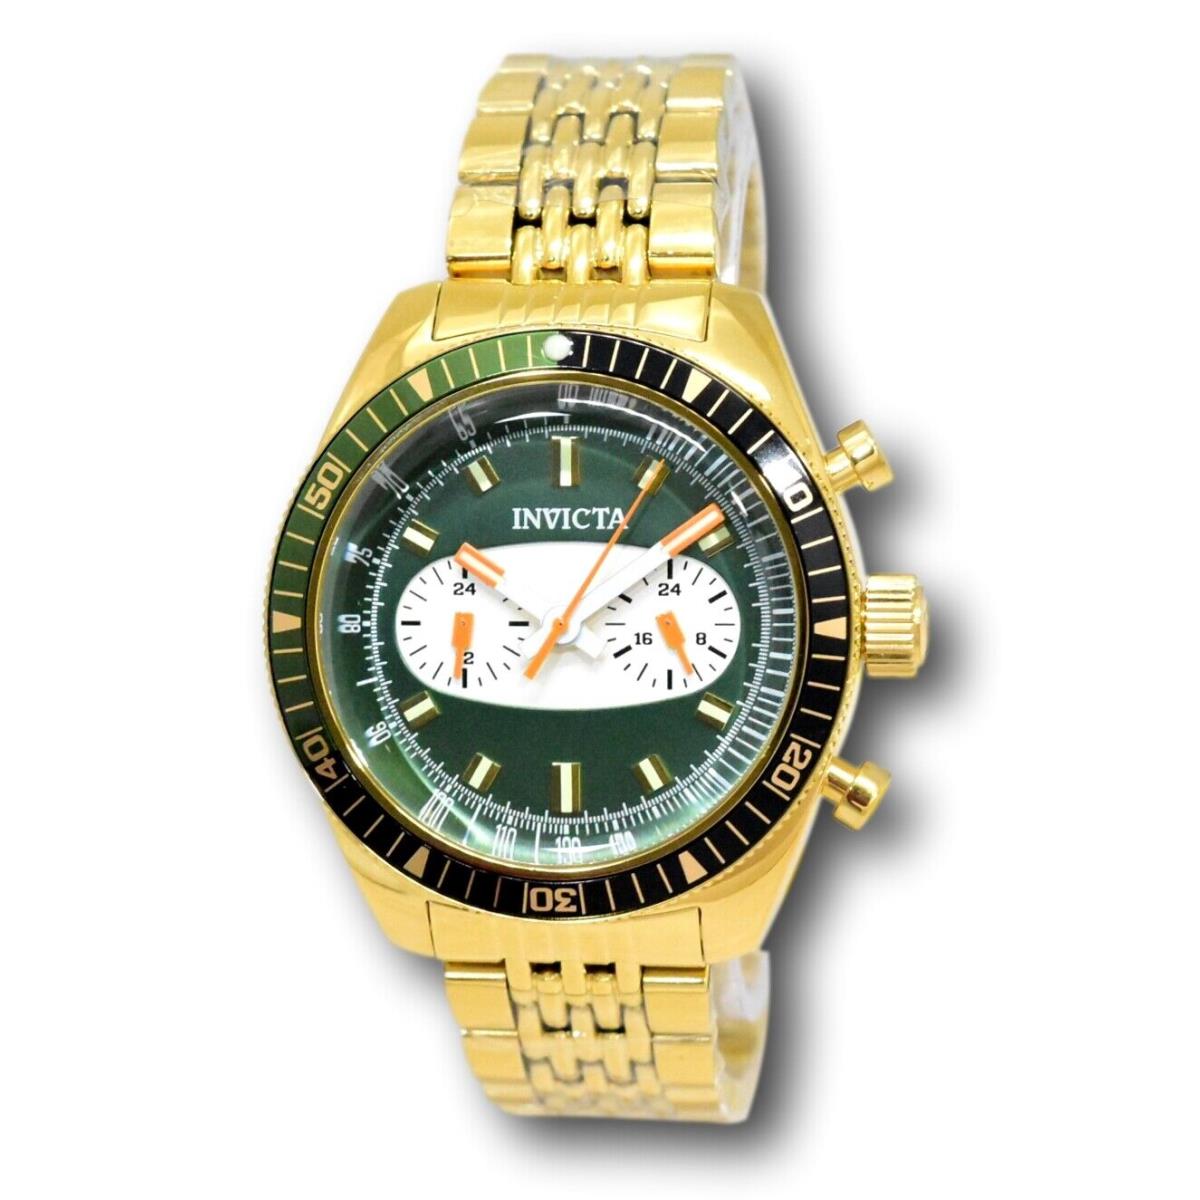 Invicta Speedway Monaco Men`s 43mm Dual Time Dials Green Dial Gold Watch 40528 - Dial: Gold, Green, White, Yellow, Band: Gold, Yellow, Bezel: Black, Gold, Green, Yellow